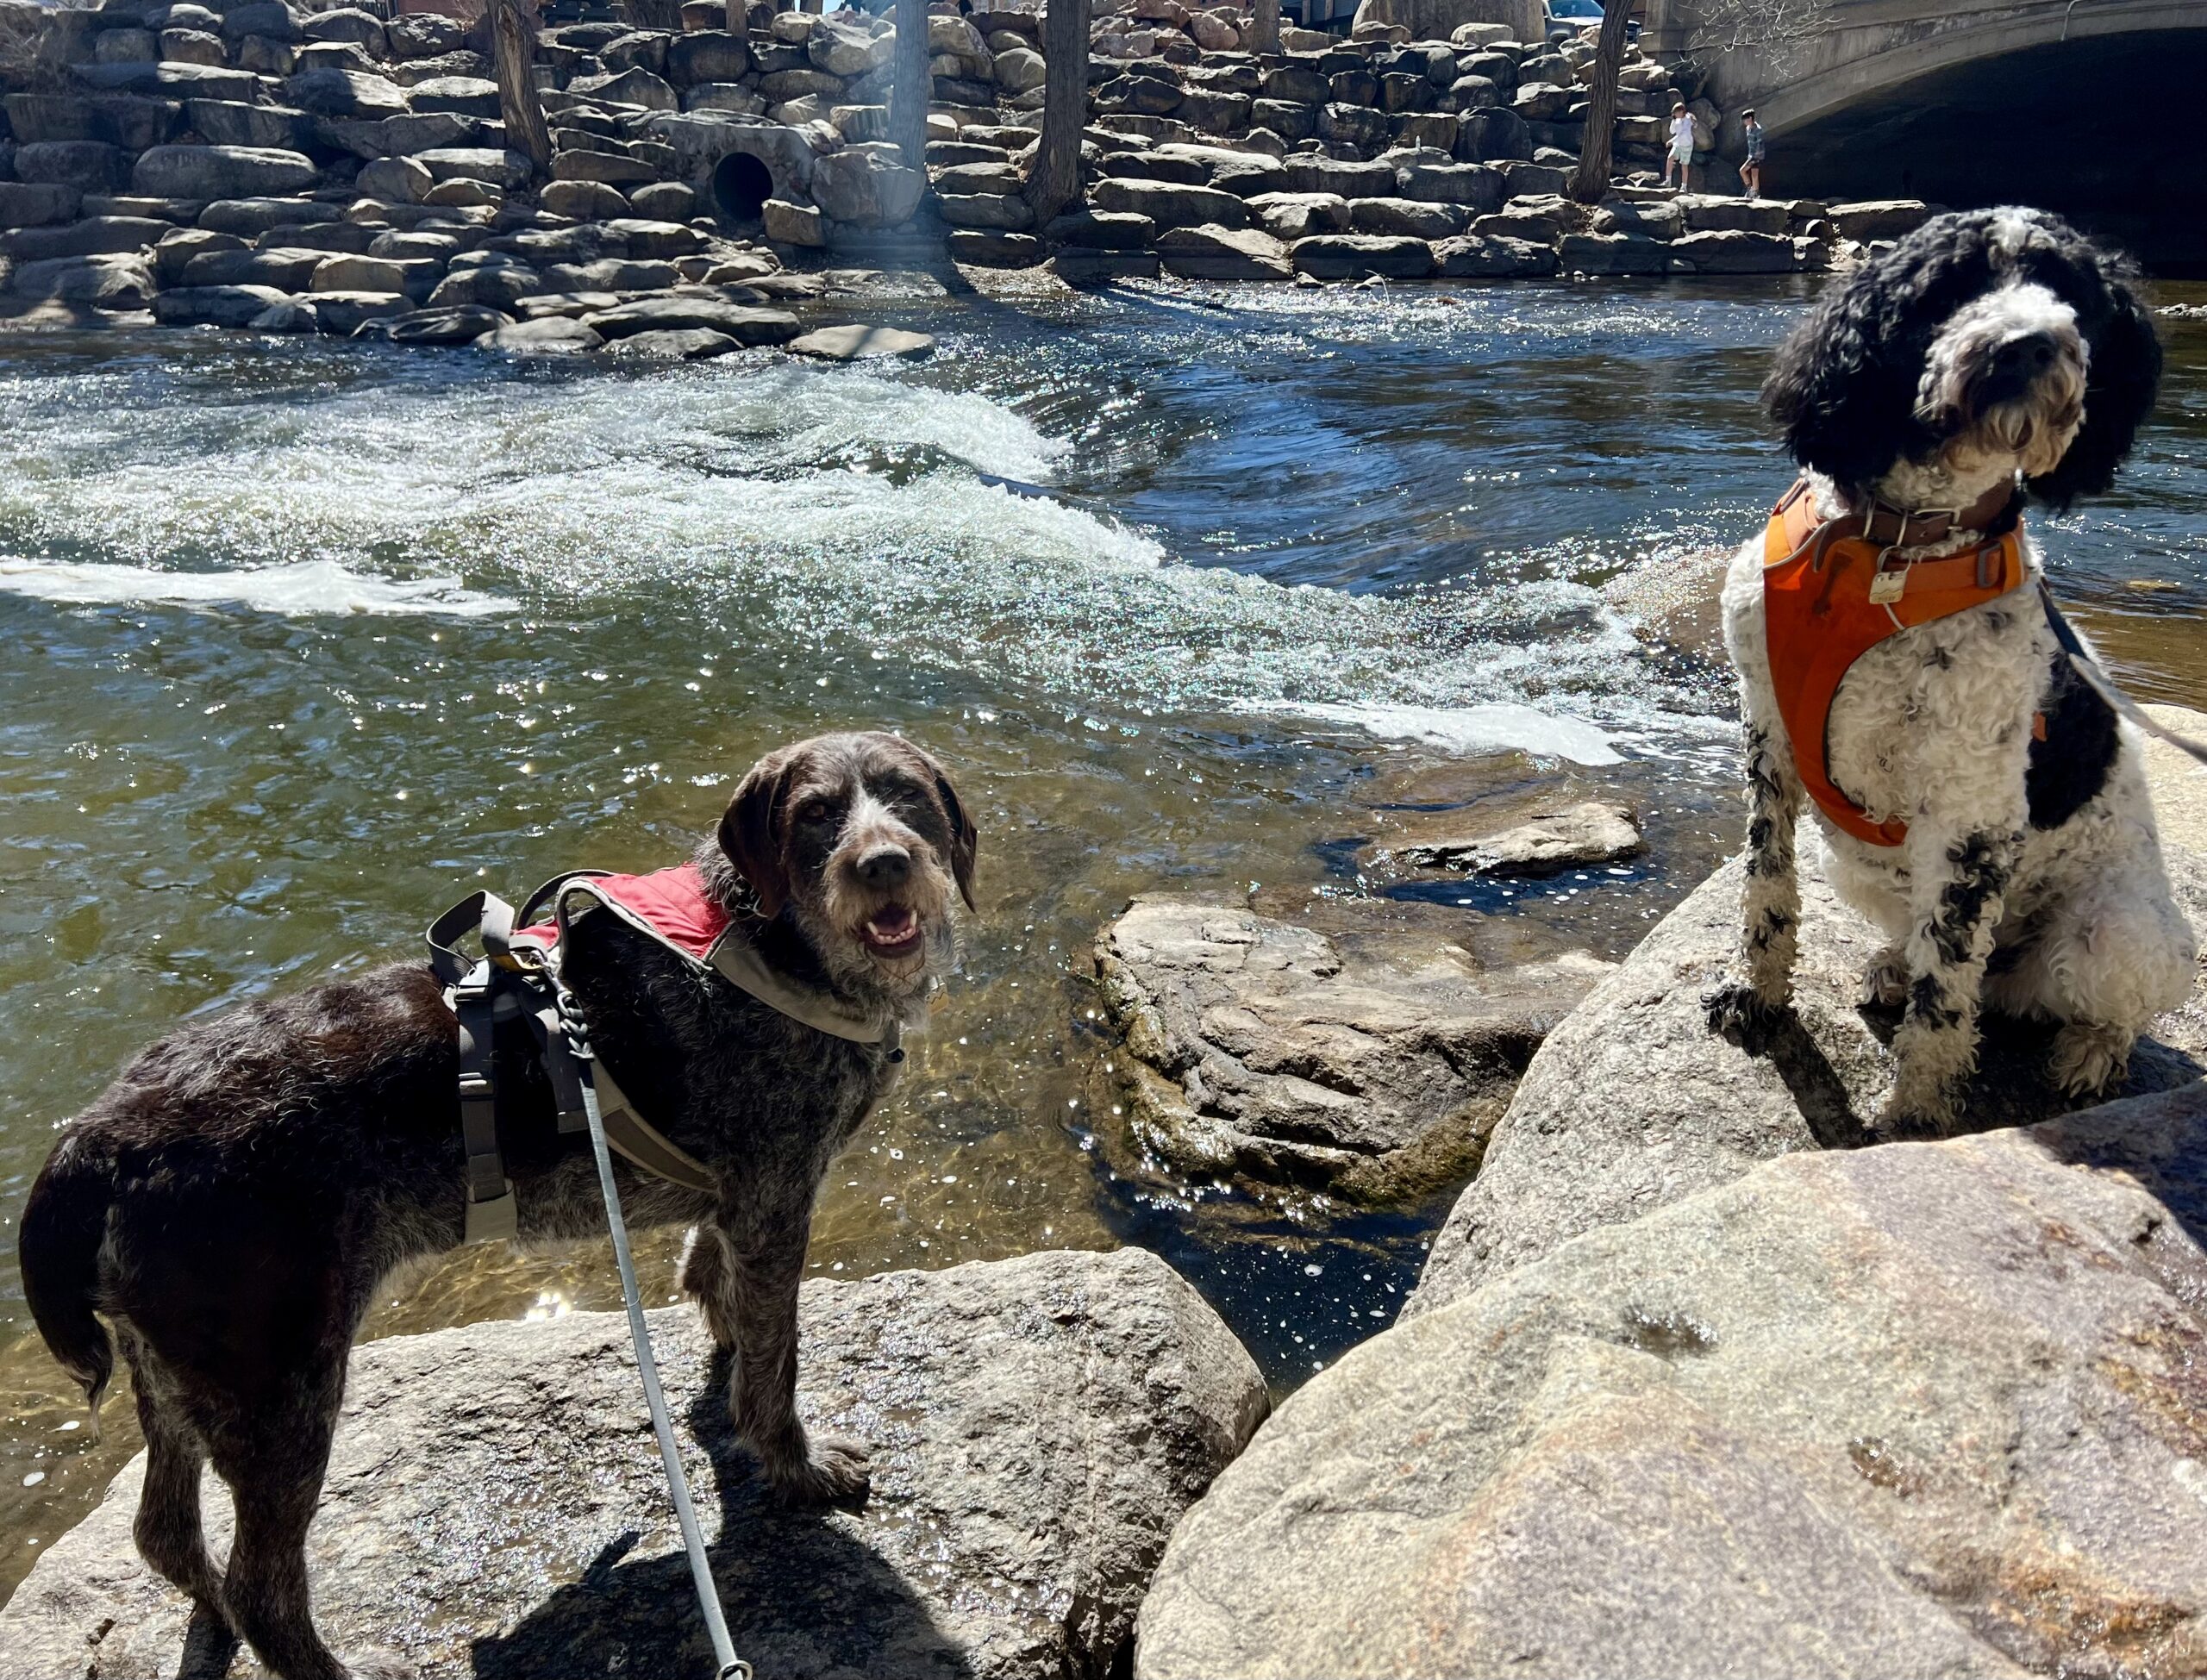 South Park Homes Blog - River Dogs